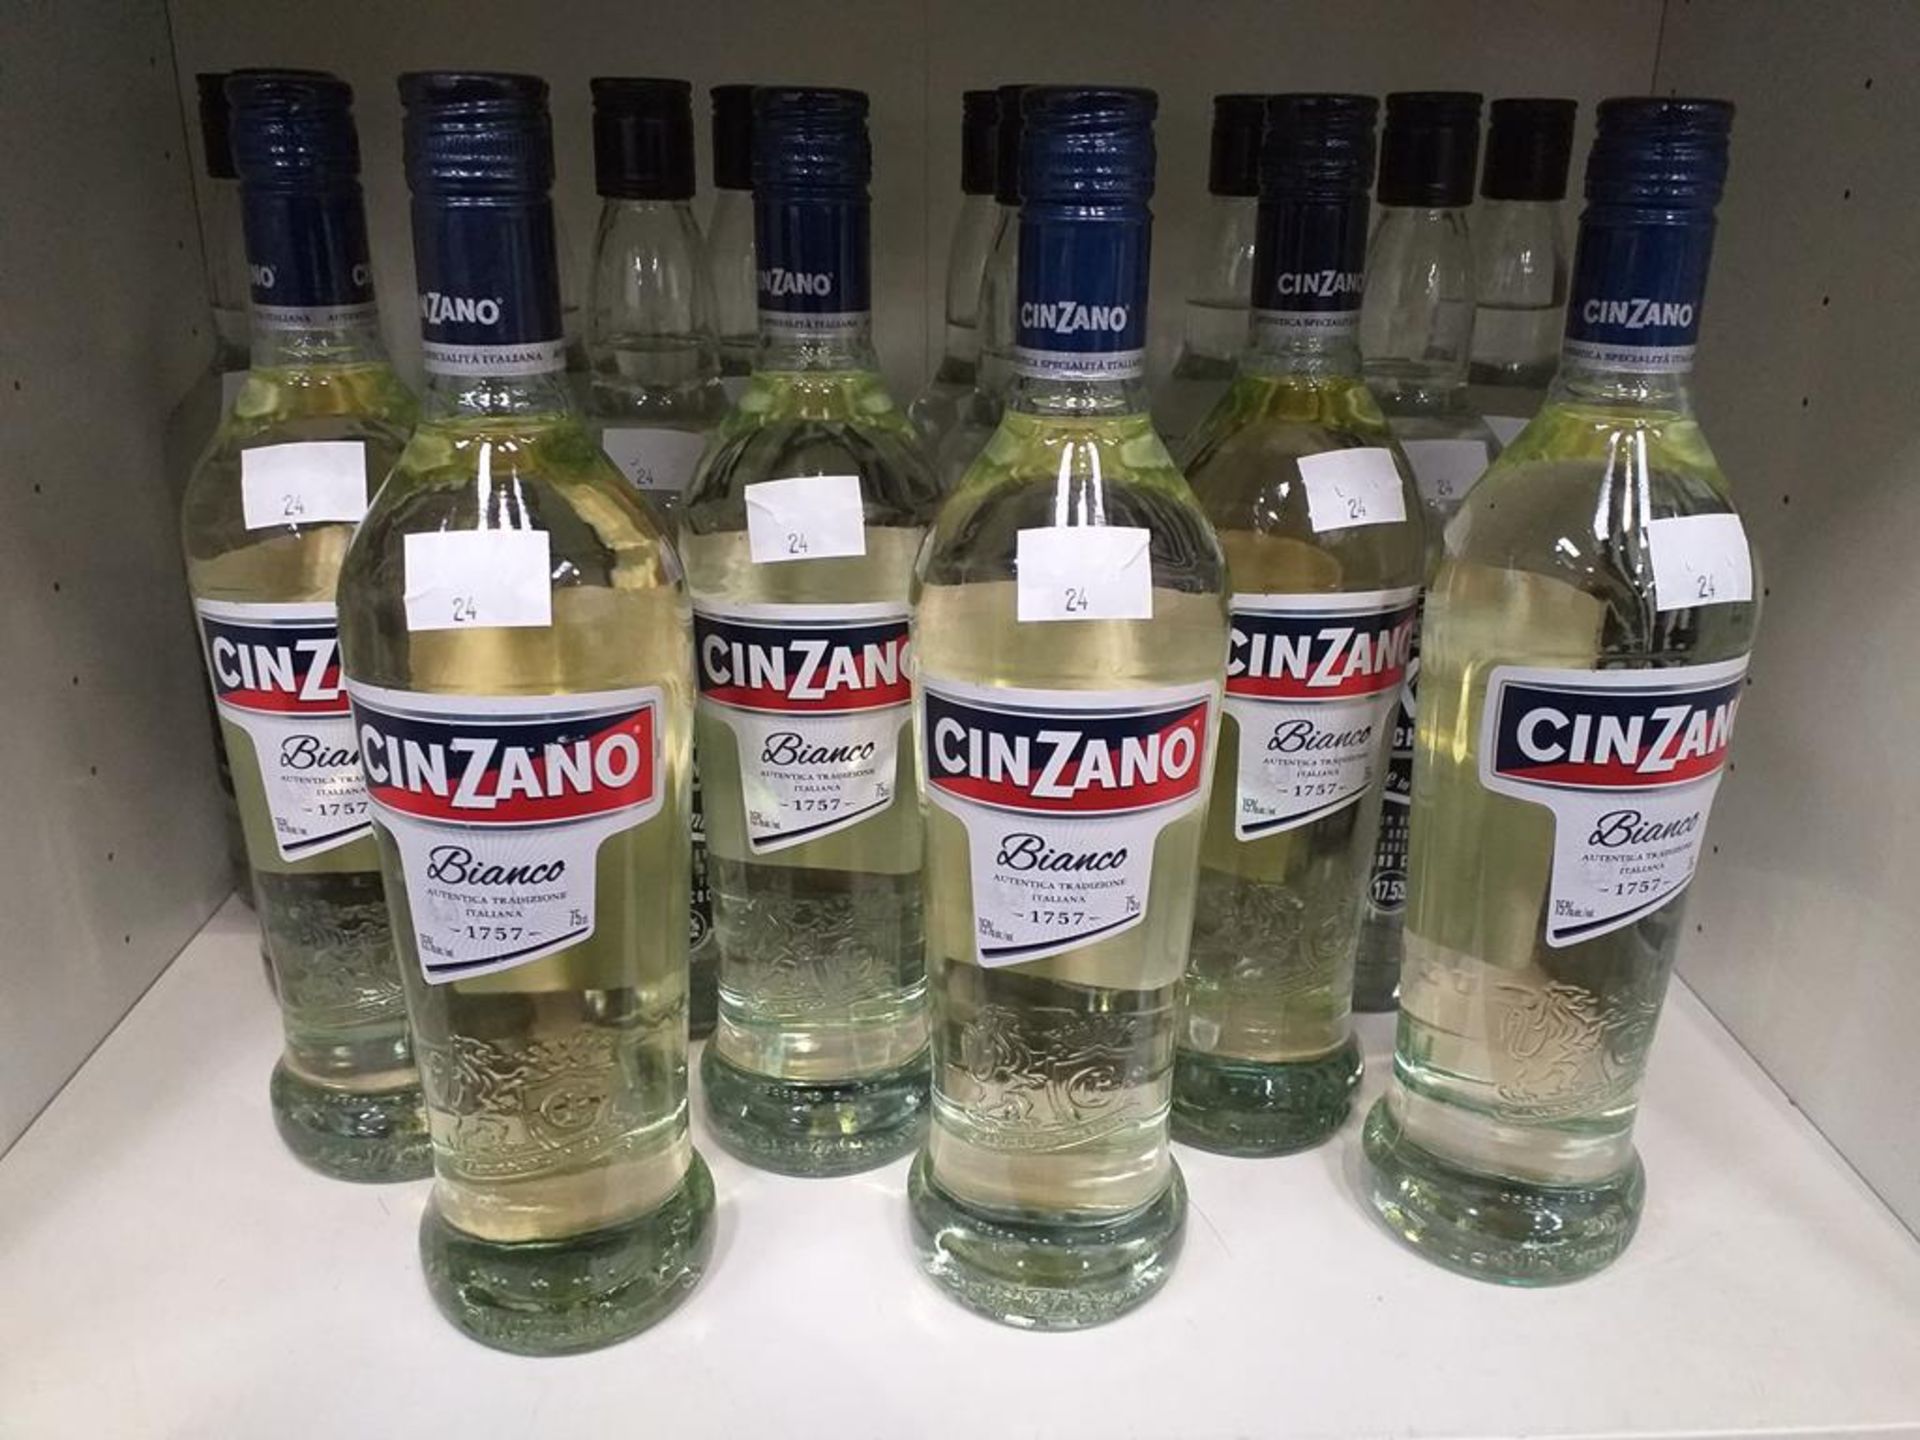 Ten bottles of V-Kat Dry Schnapps and six bottles of Cinzano Bianco Vermouth